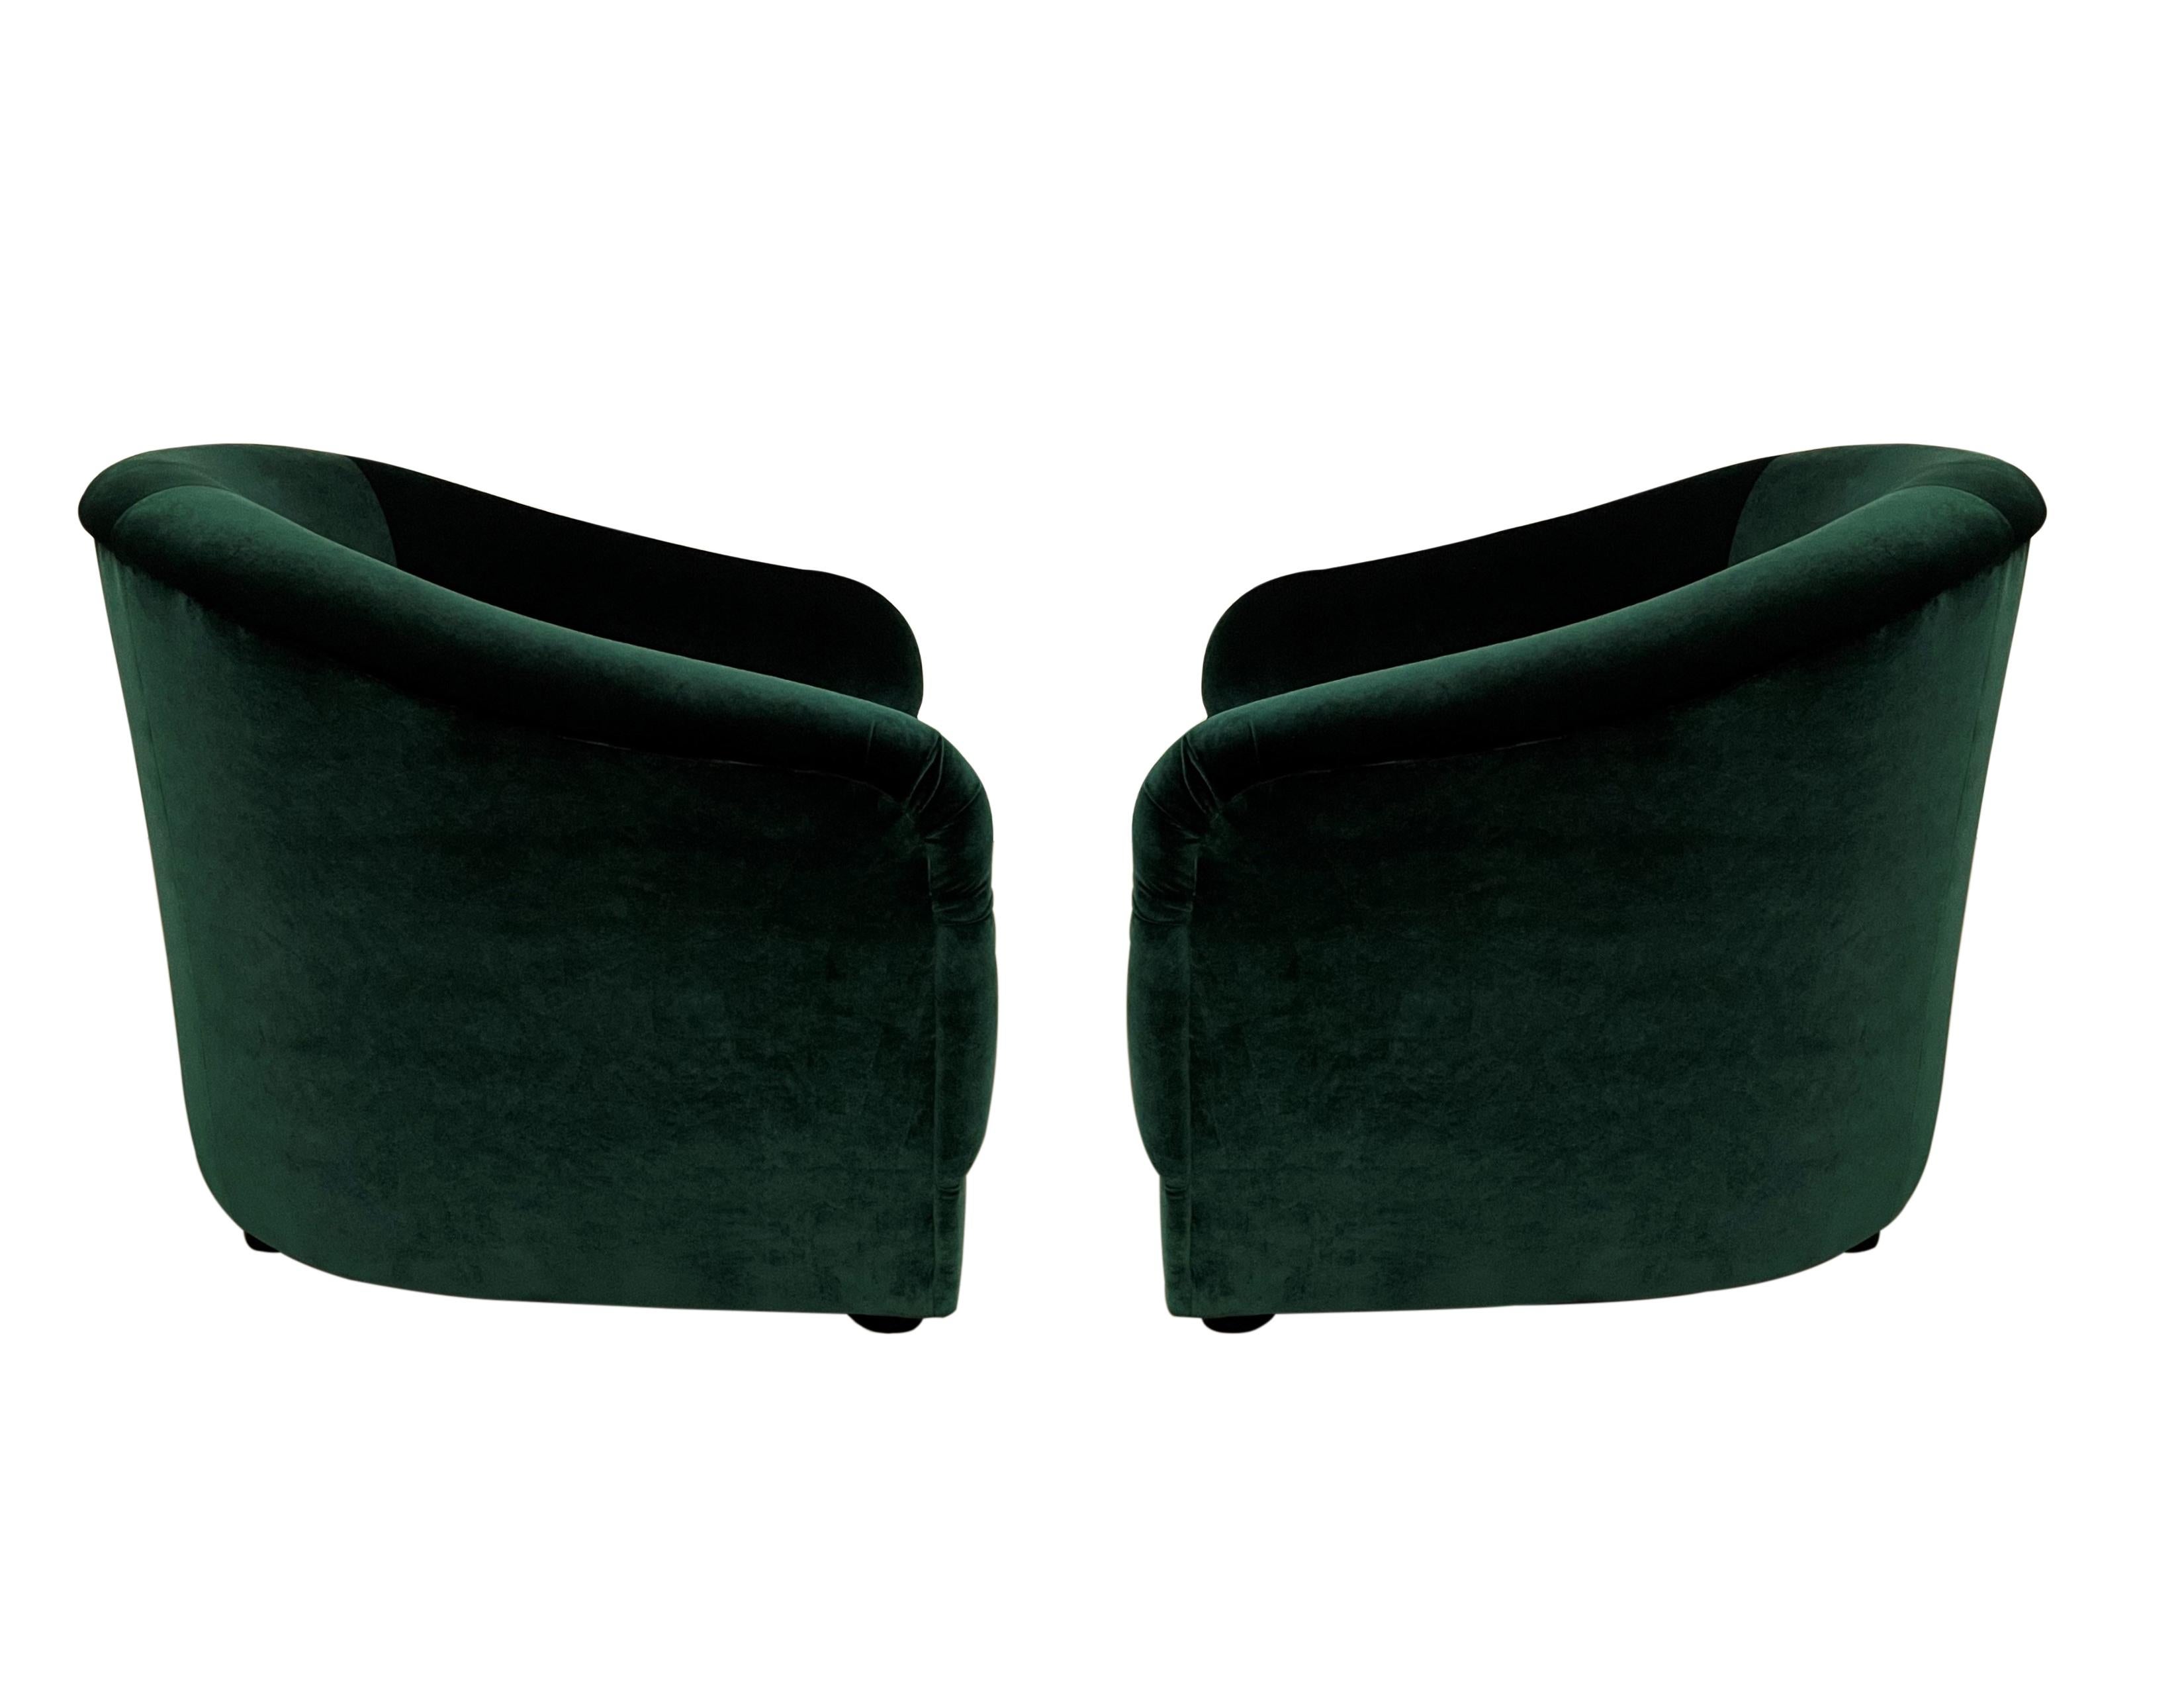 American Pair of Mid-Century Modern Green Barrel Back Lounge Chairs For Sale